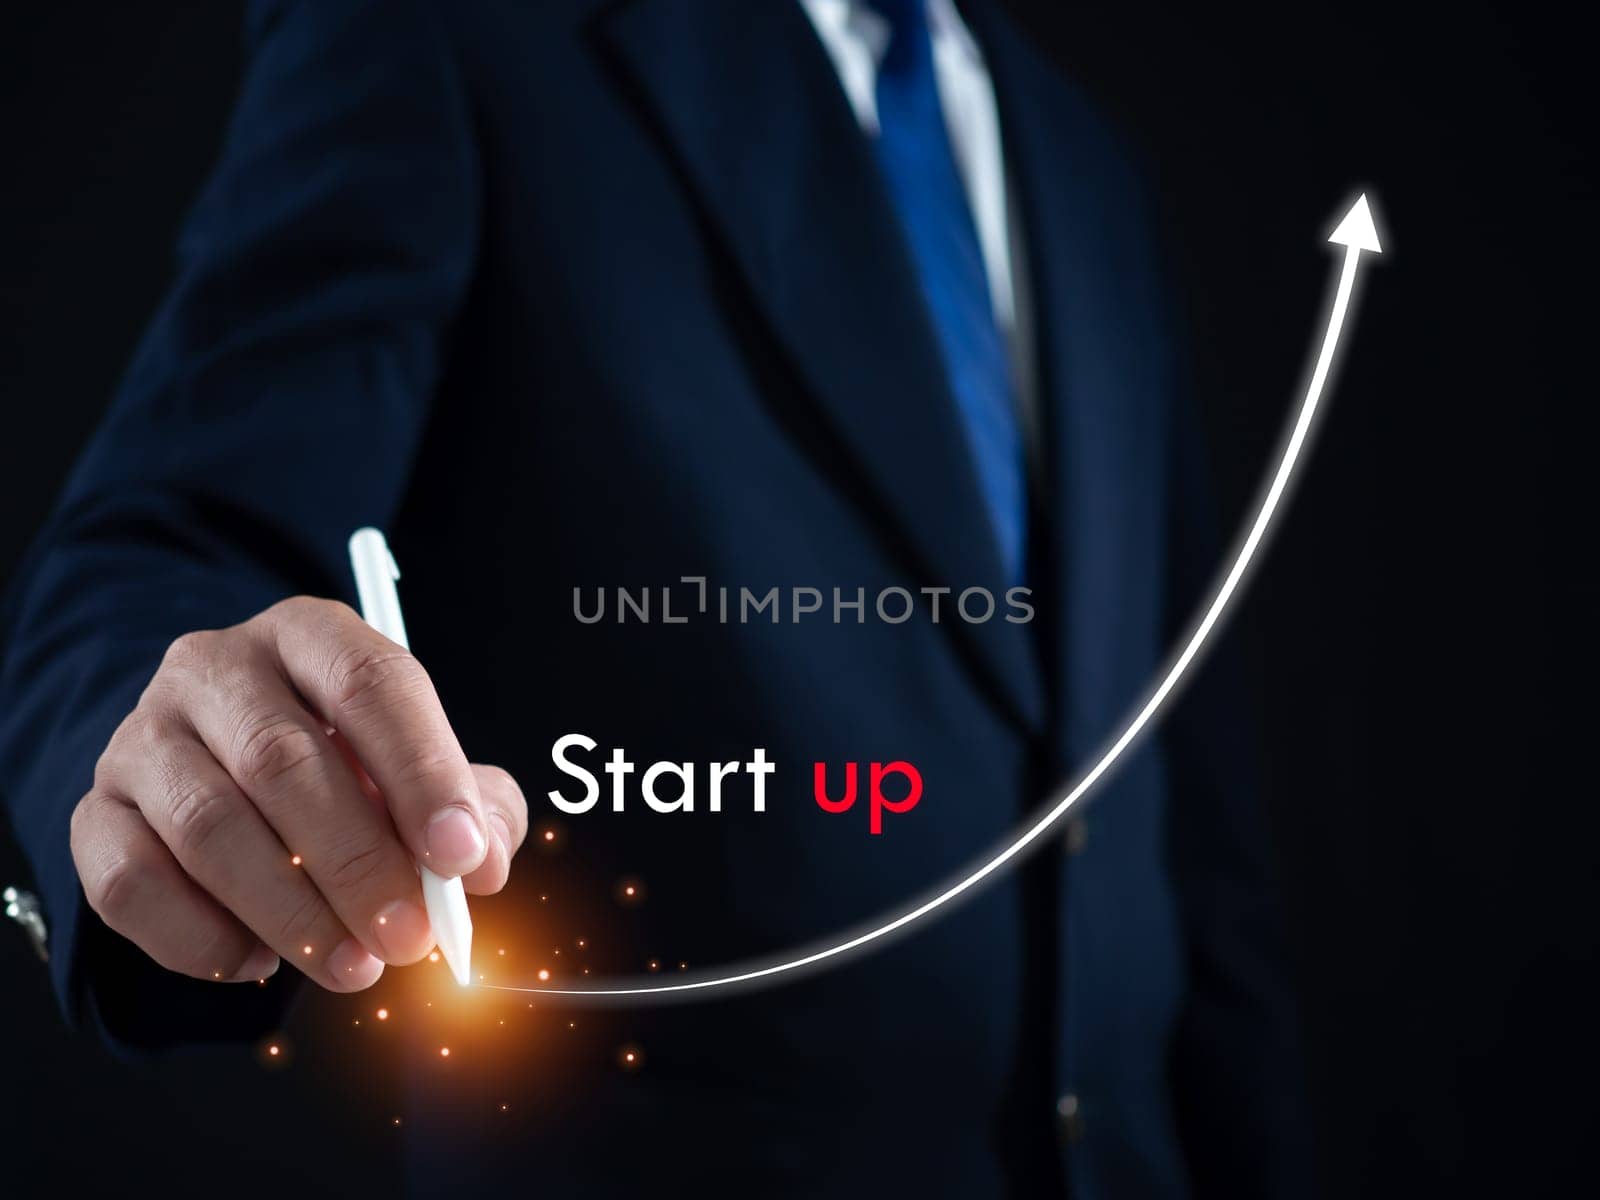 Businessman presses the pen at the starting point to start a business. Startup concept. Business concept.